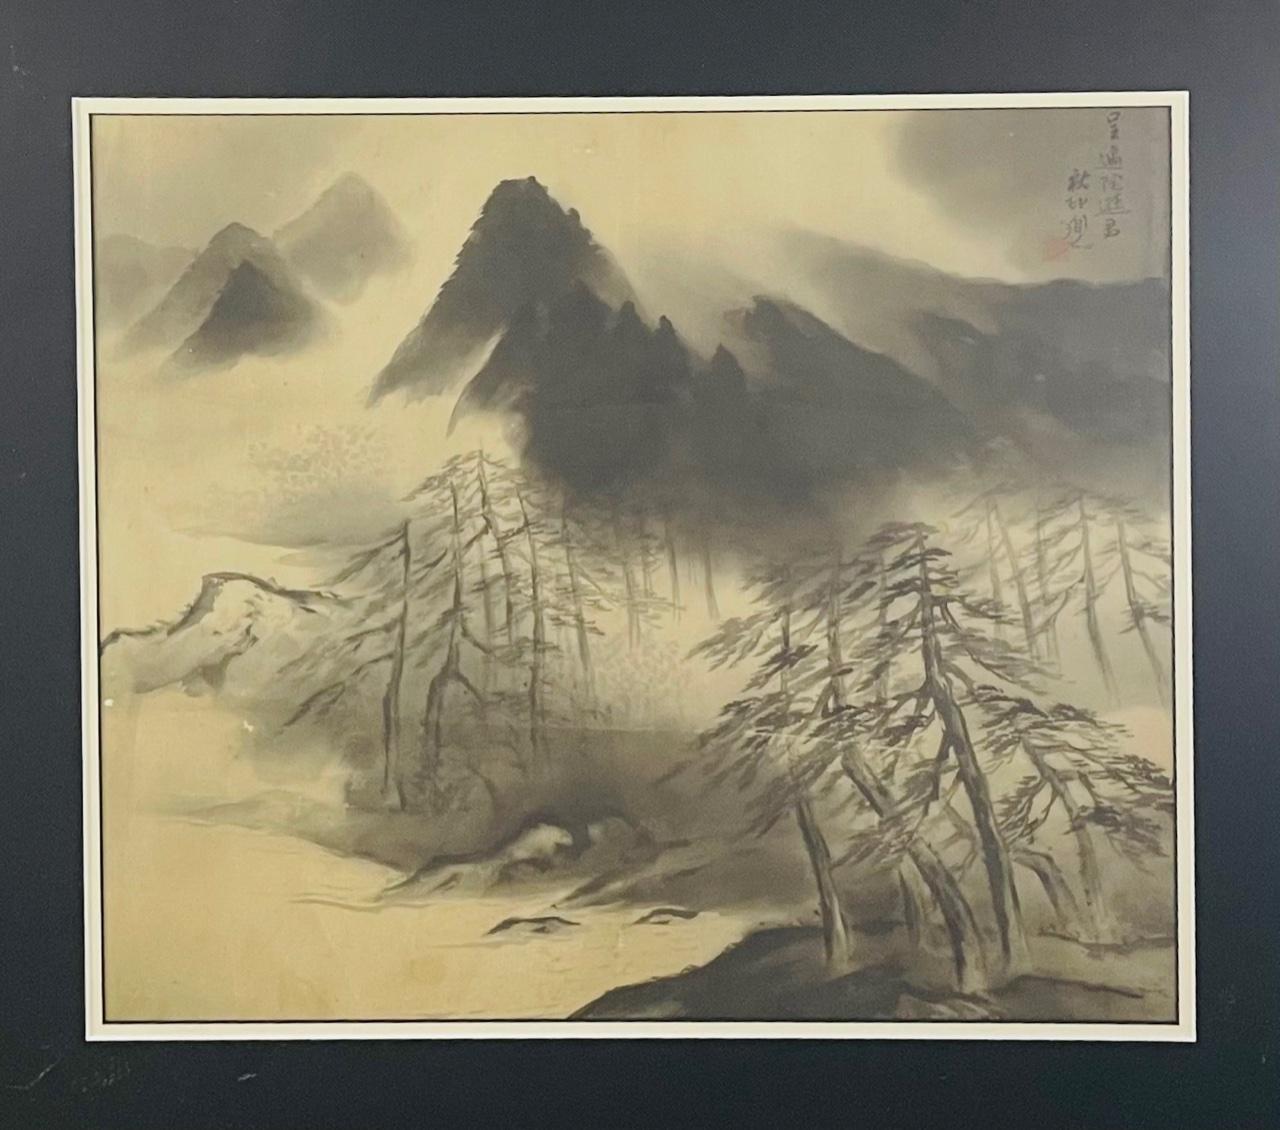 An antique Sumi ink ( Sumi-e) Japanese painting featuring a landscape scene of mountains and beautifully made on silk. The painting is matted and framed.

The Japanese term “sumi” means “black ink”, “e” means “painting”. It indicates one of the